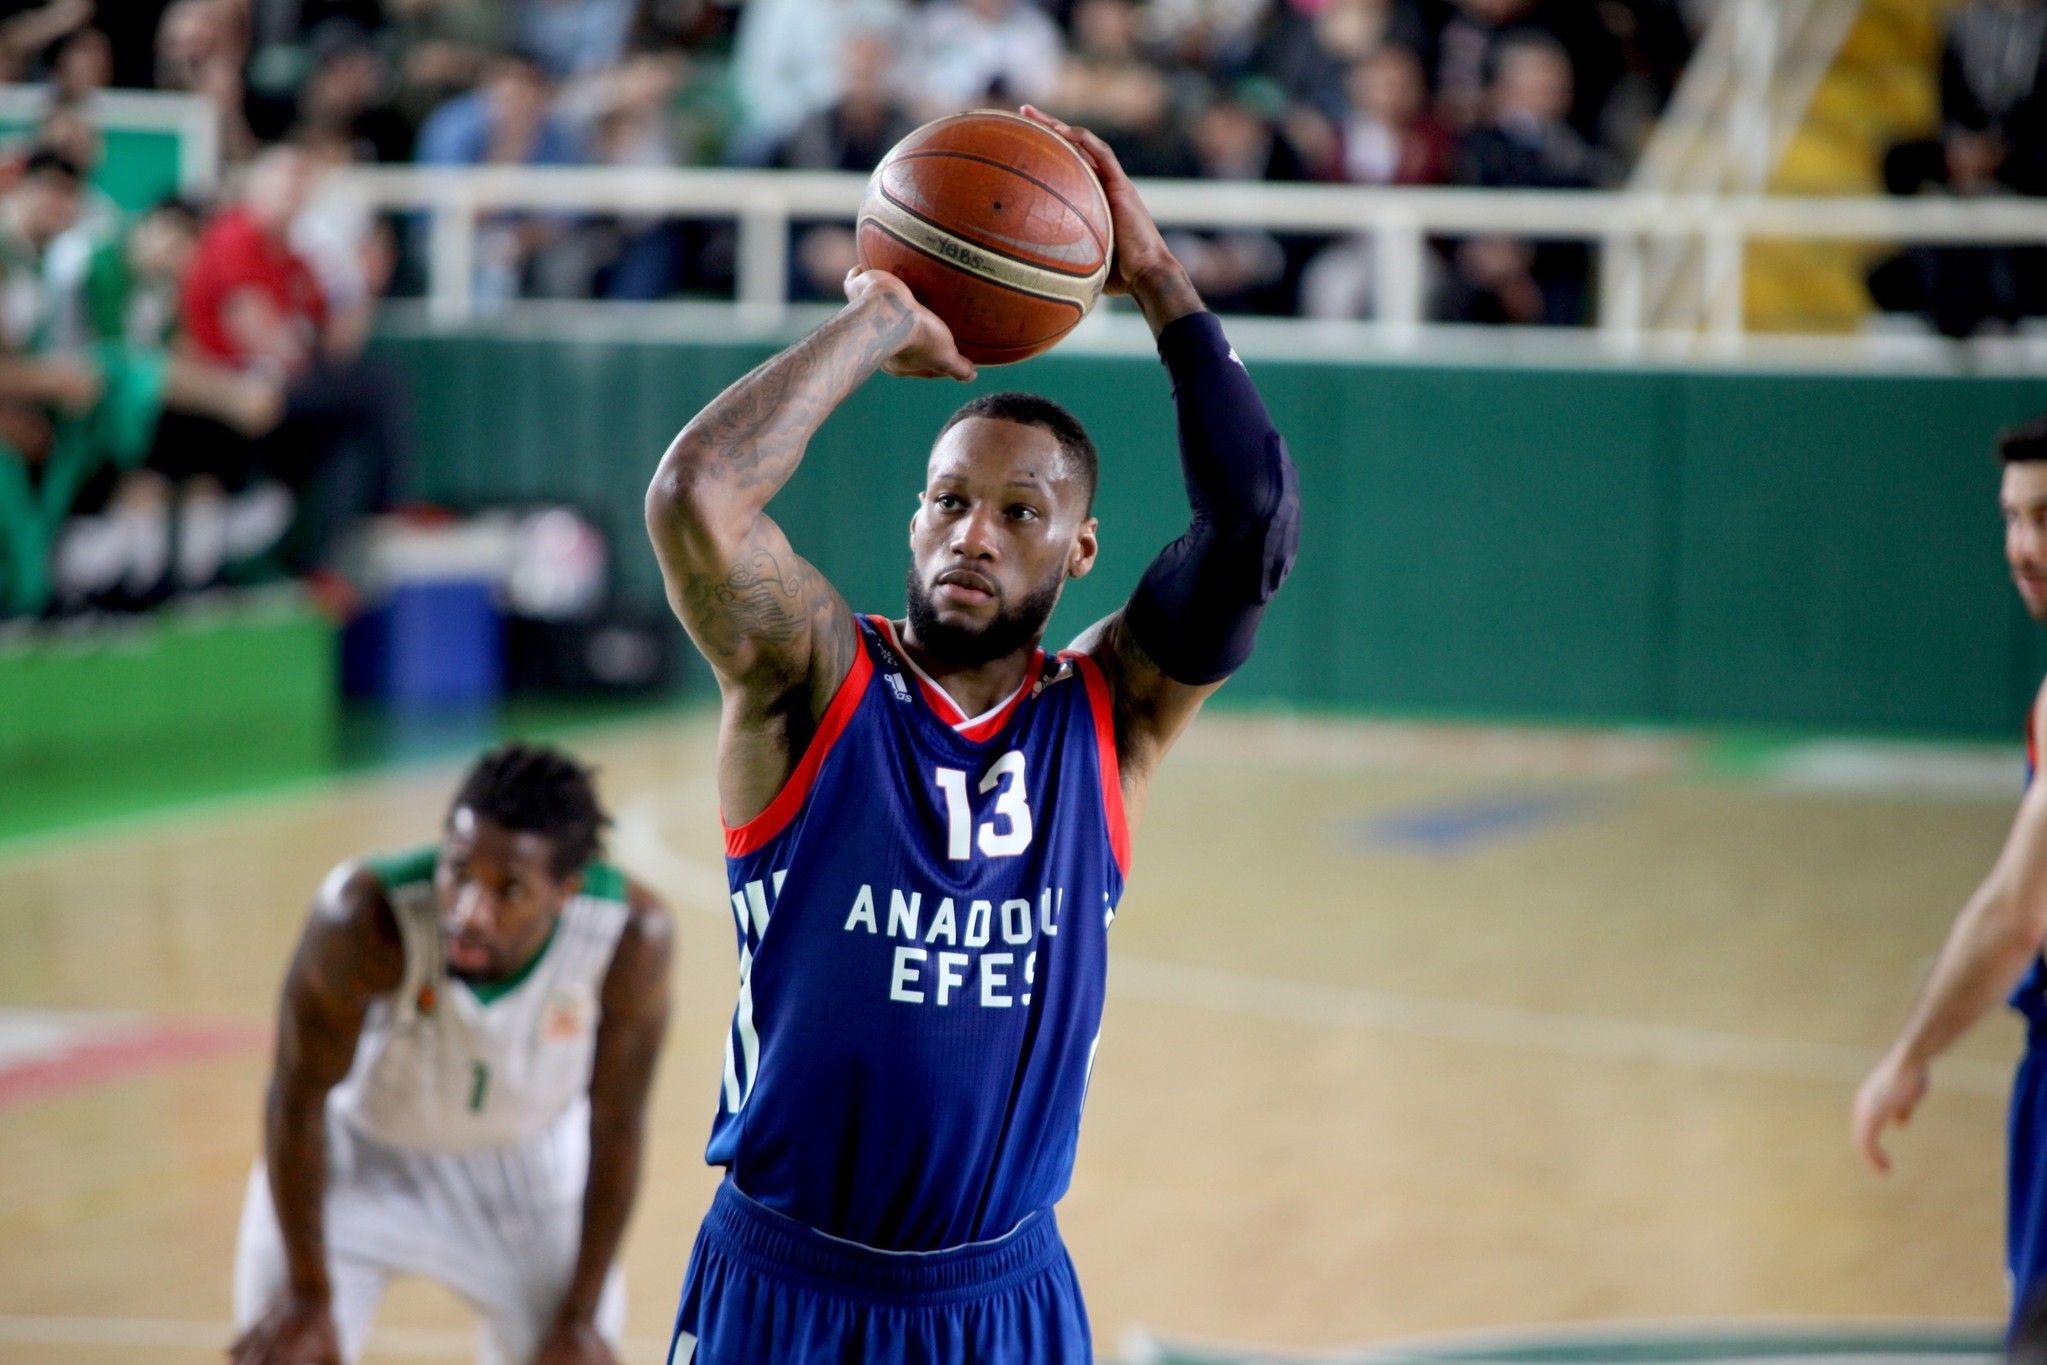 Anadolu Efes's Sony Weems scored 26 points against Brose Bamberg in their EuroLeague Round 26 match.